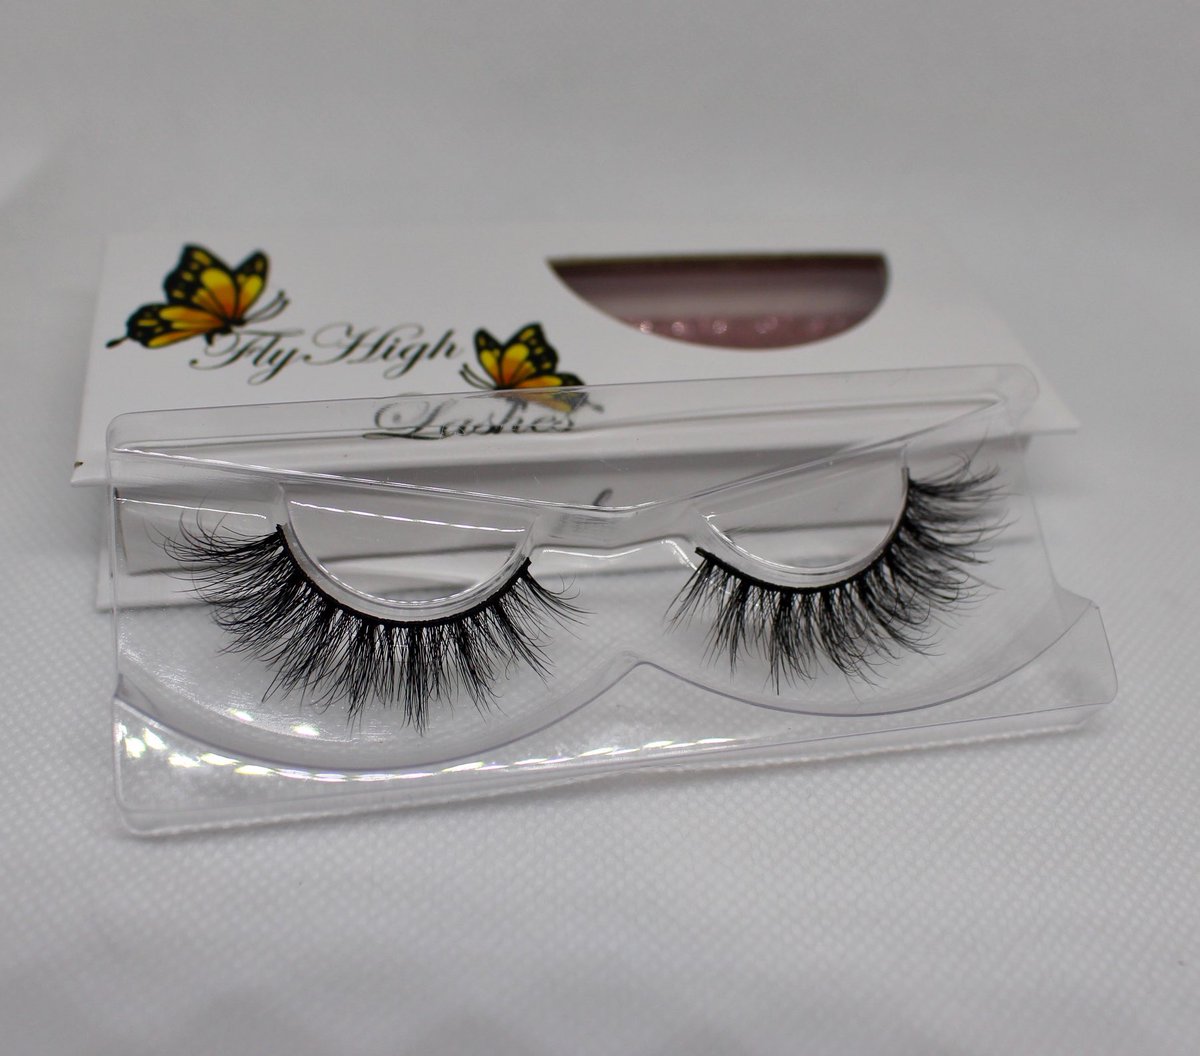 Style “Lilac” 
mink lashes, can wear up to 25 times

#lashes #ilovelashes #minklashes #mink #minkstriplashes #striplashes #eyelashes #lashesonfleek #bomblashes #flyhighlashes #smallbusiness